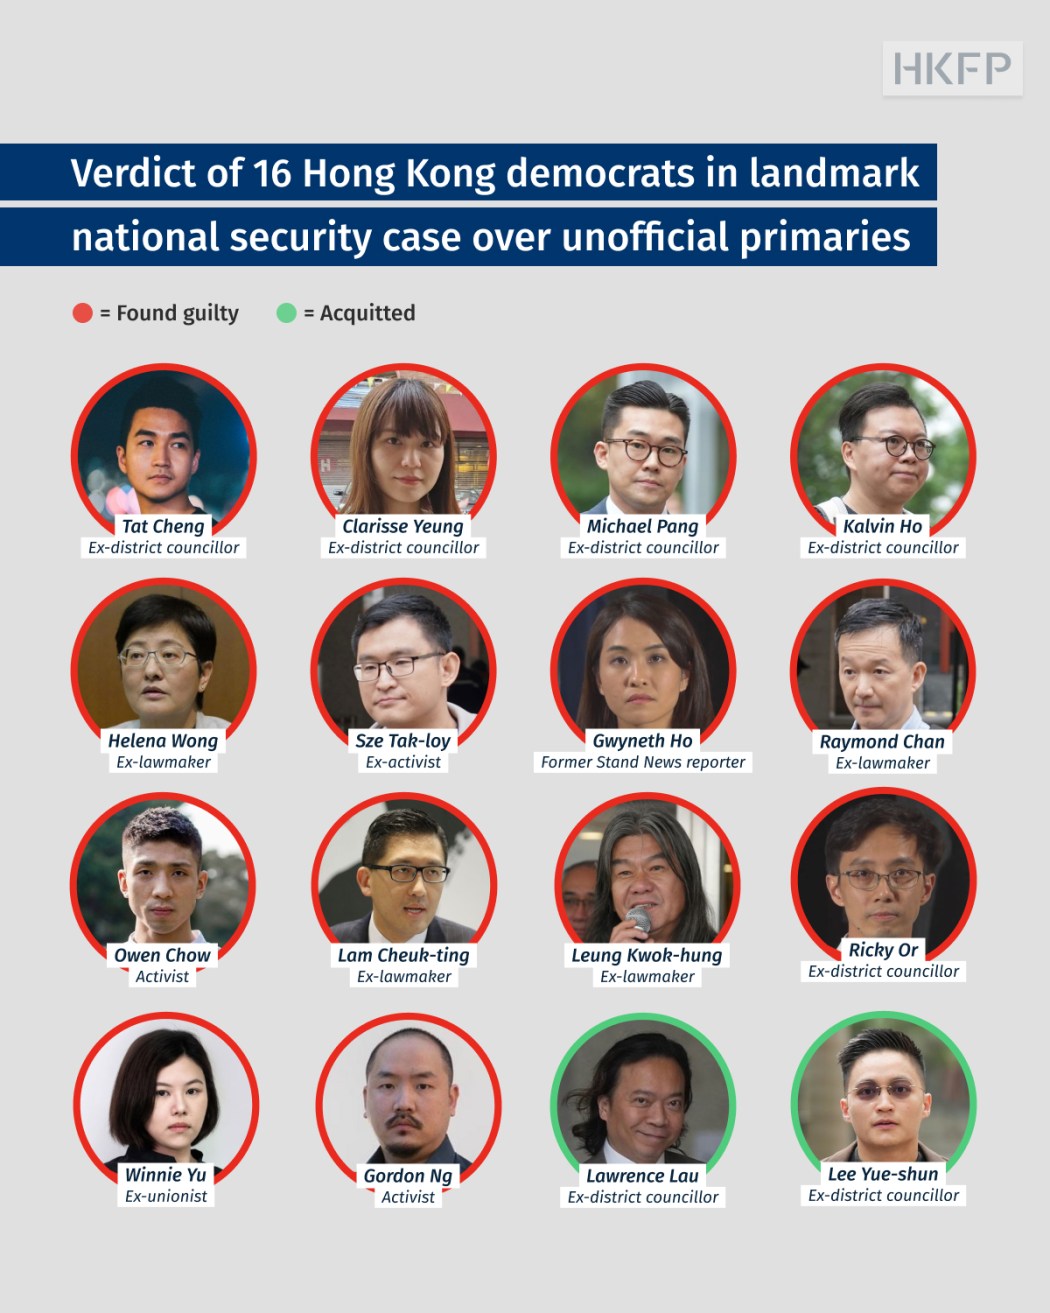 The verdicts of 16 Hong Kong democrats who have pleaded not guilty in landmark national security case over unofficial primaries. Graphic: Shan Chan/HKFP.